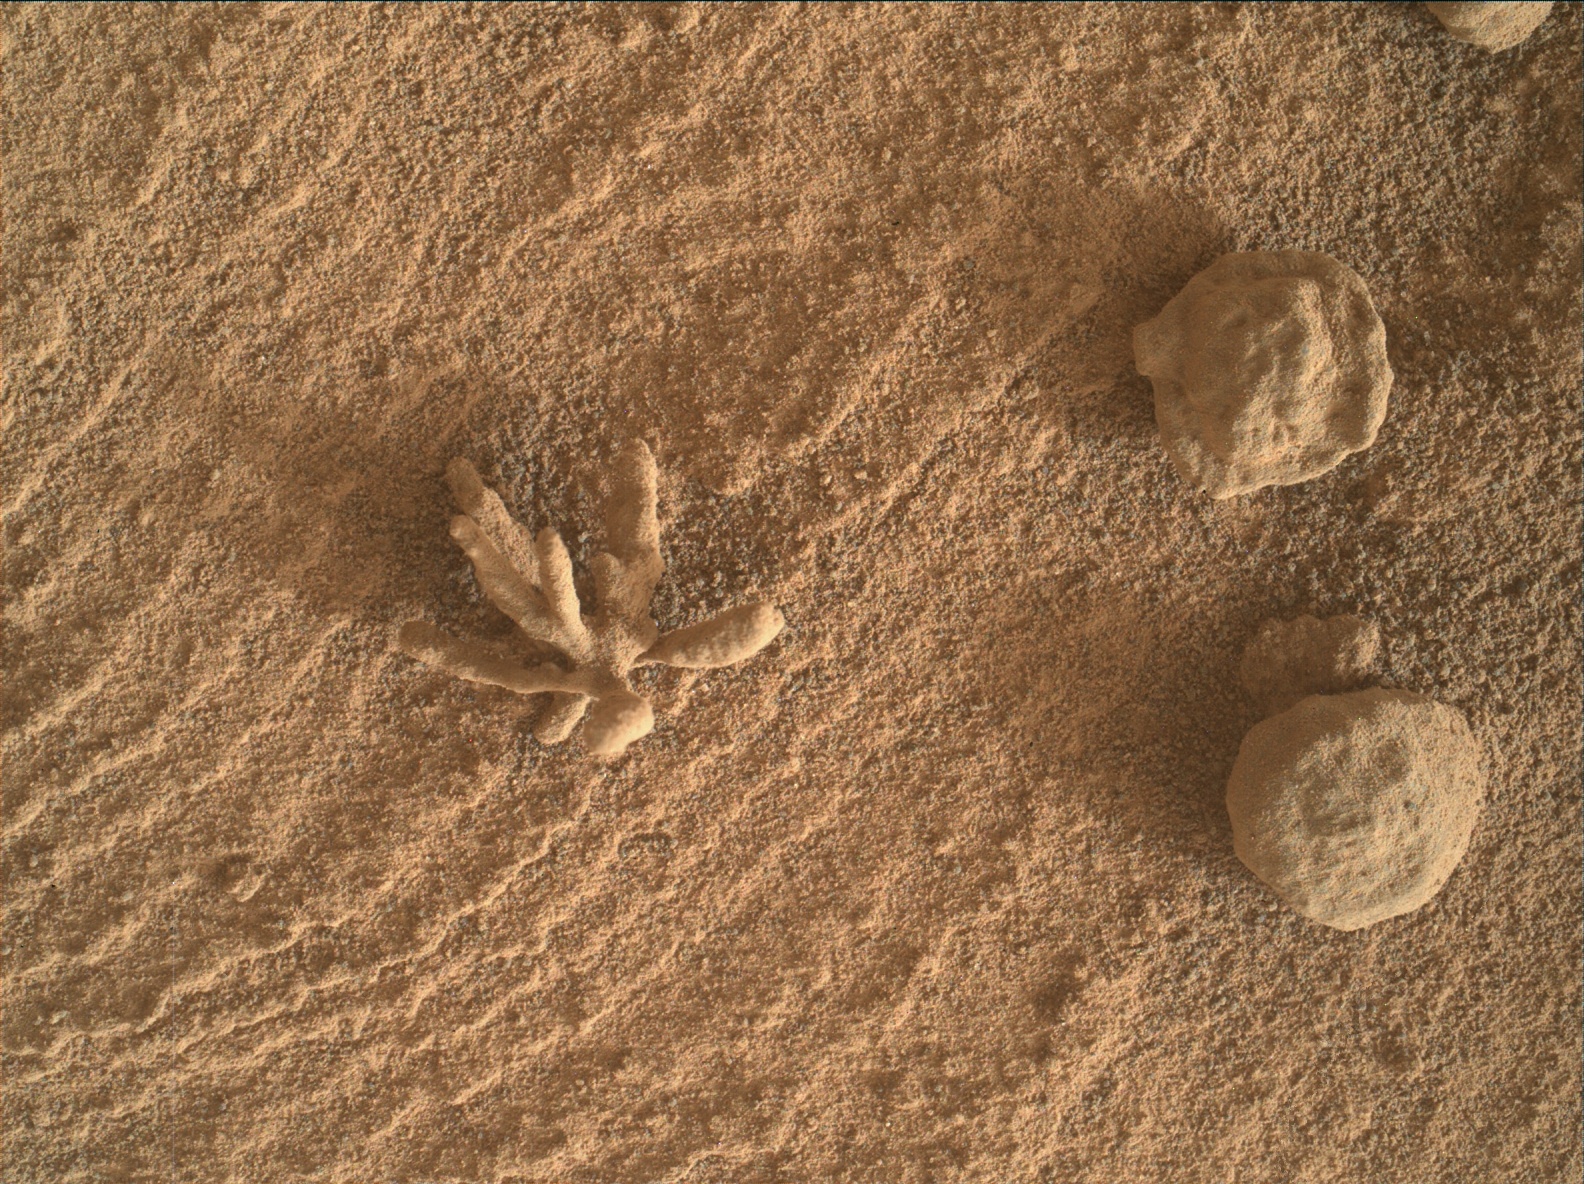 Nasa's Mars rover Curiosity acquired this image using its Mars Hand Lens Imager (MAHLI) on Sol 3397